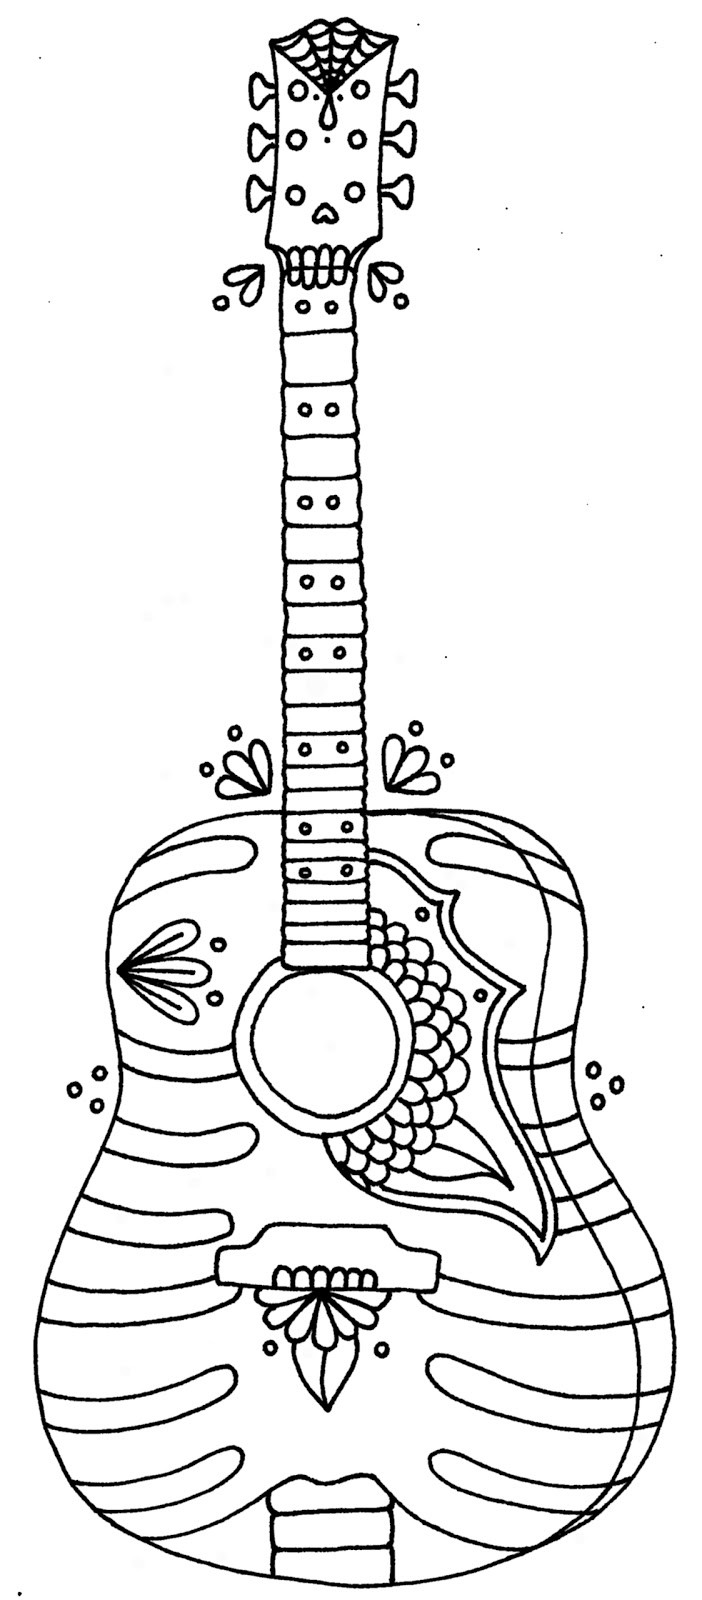 Guitar Coloring Pages For Adults
 Yucca Flats N M Wenchkin s Coloring Pages Skele Guitar